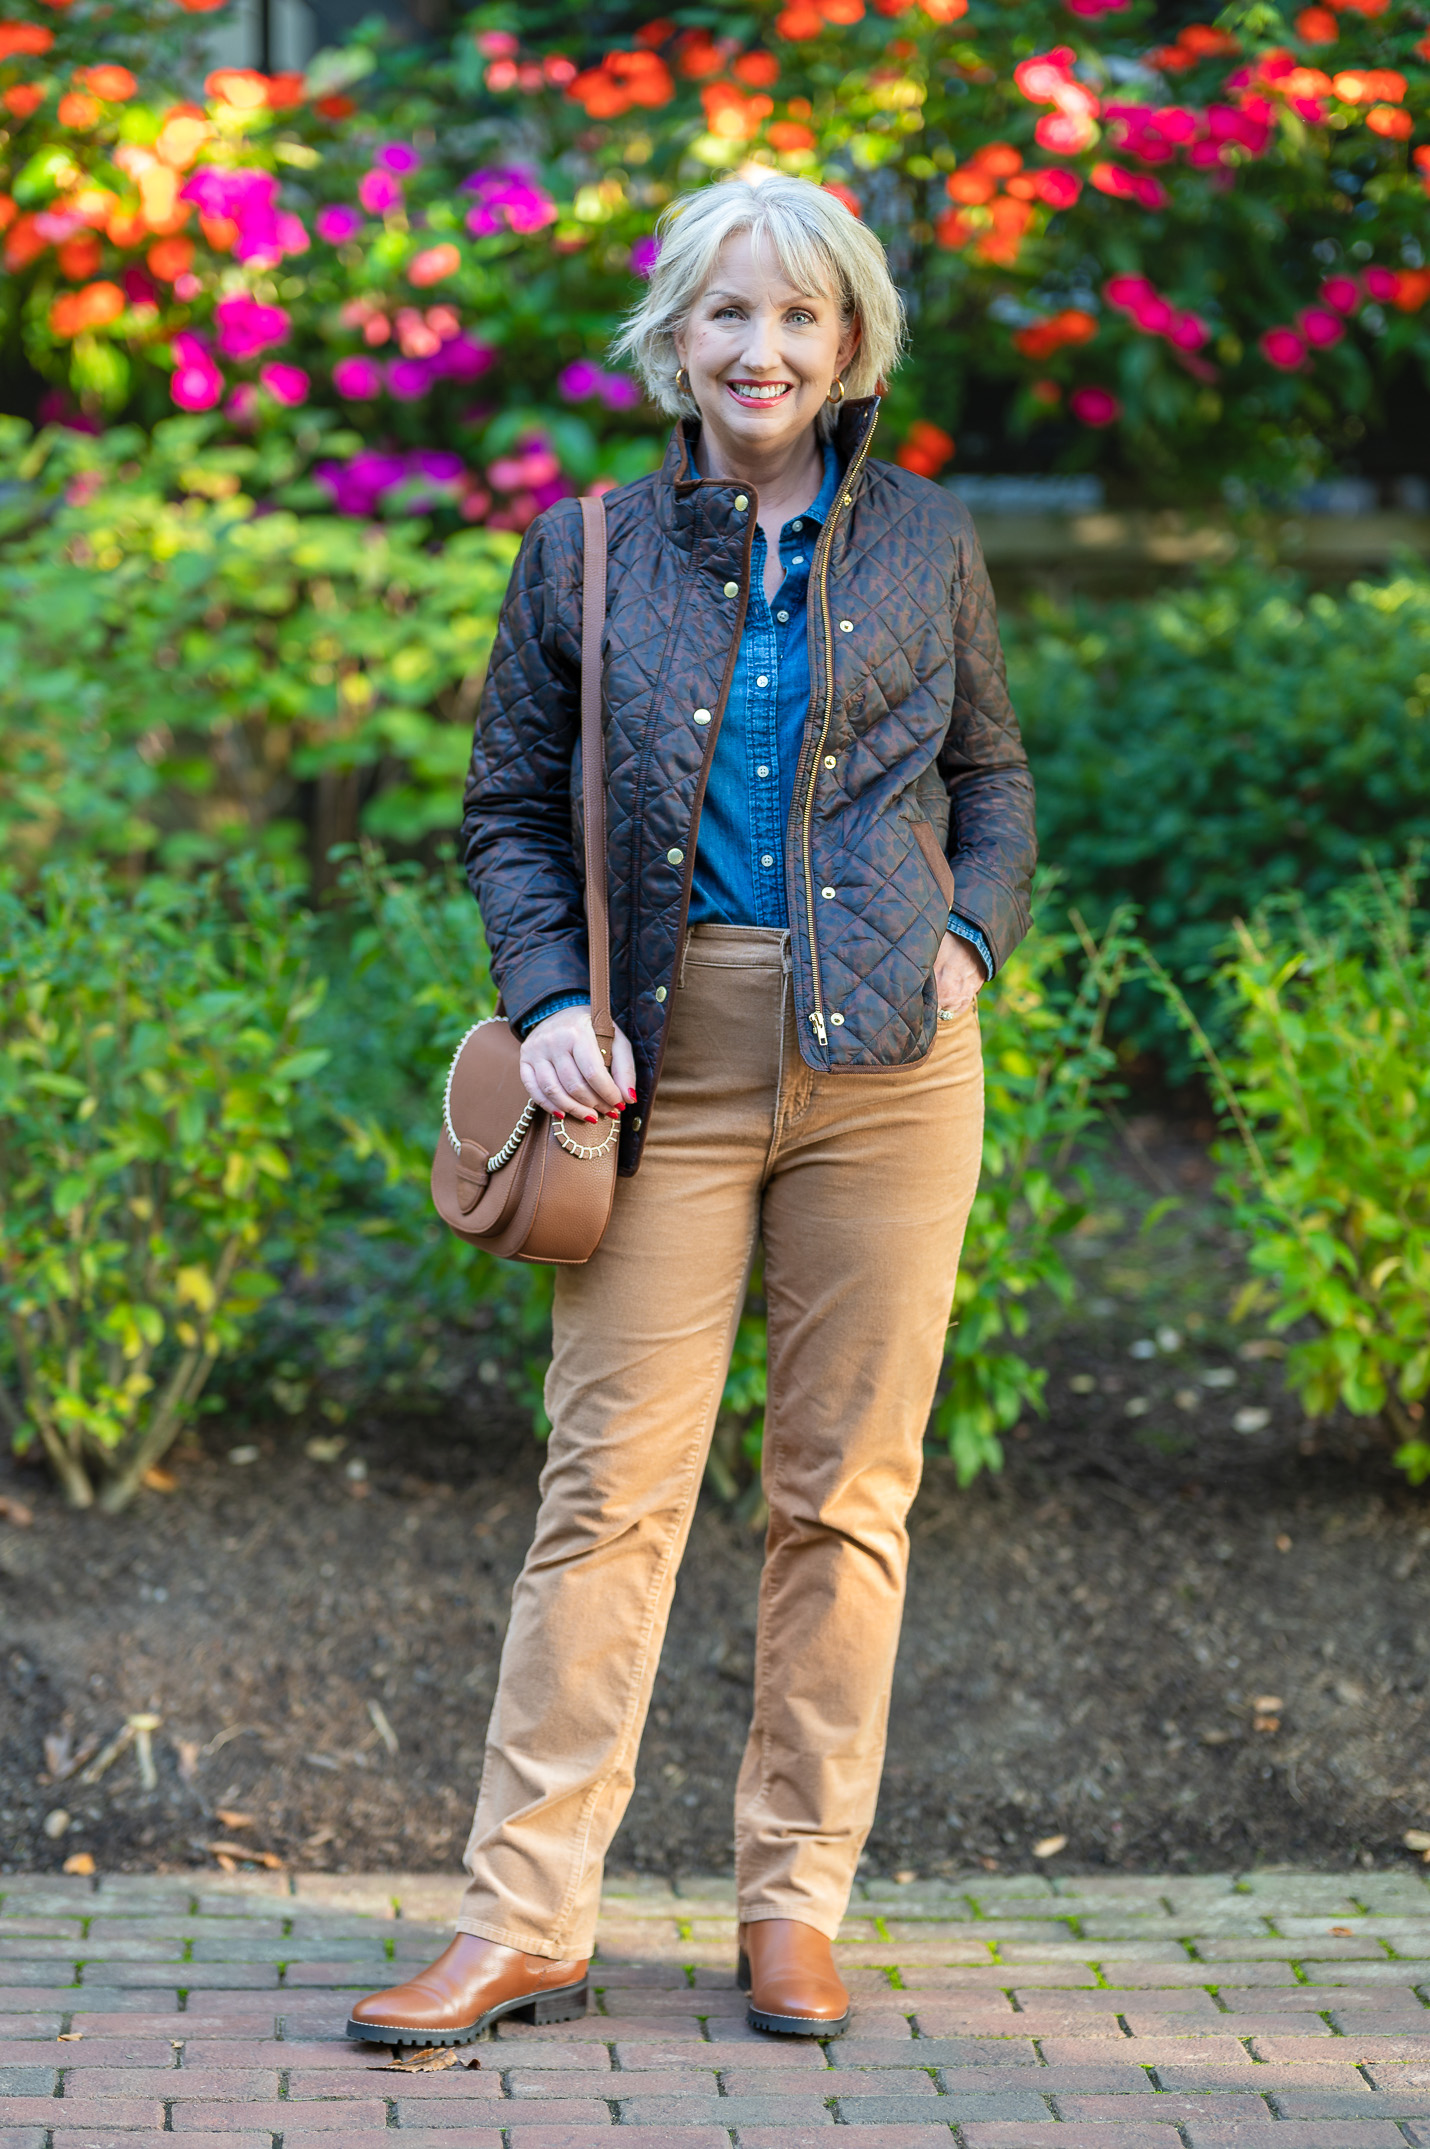 styling cords for favorite fall outings